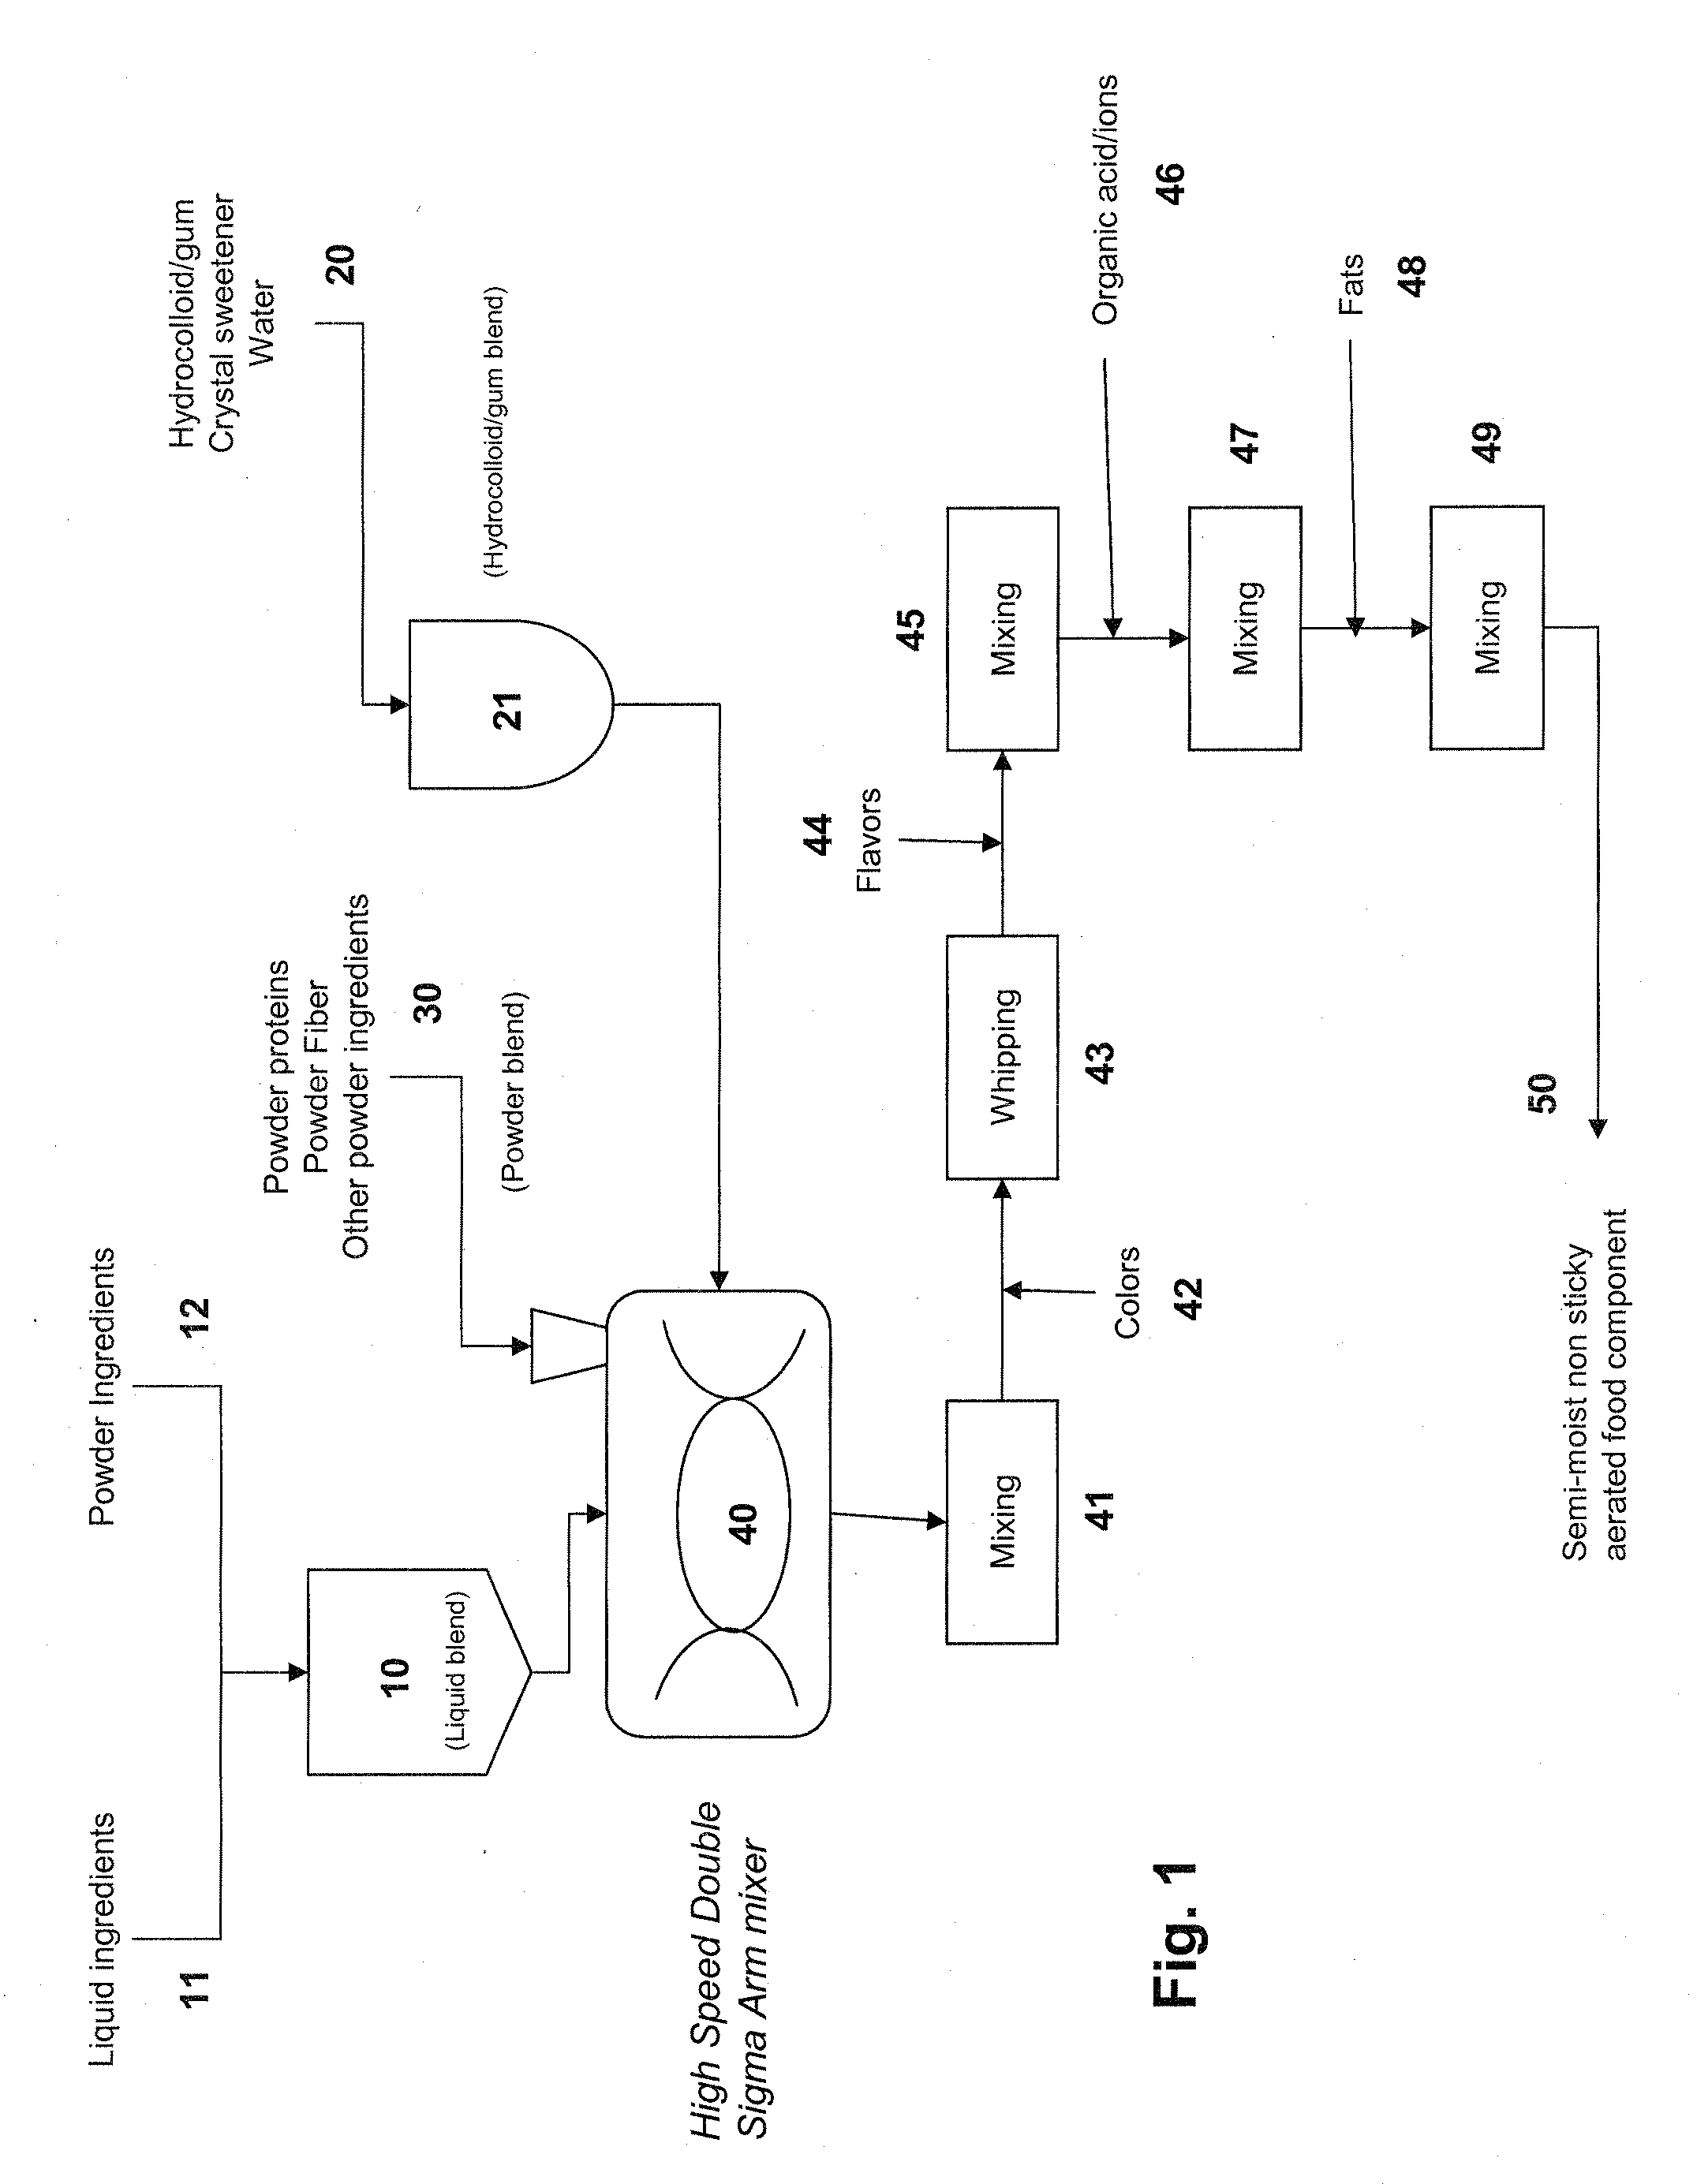 Process for preparing an aerated food product comprising protein and fiber